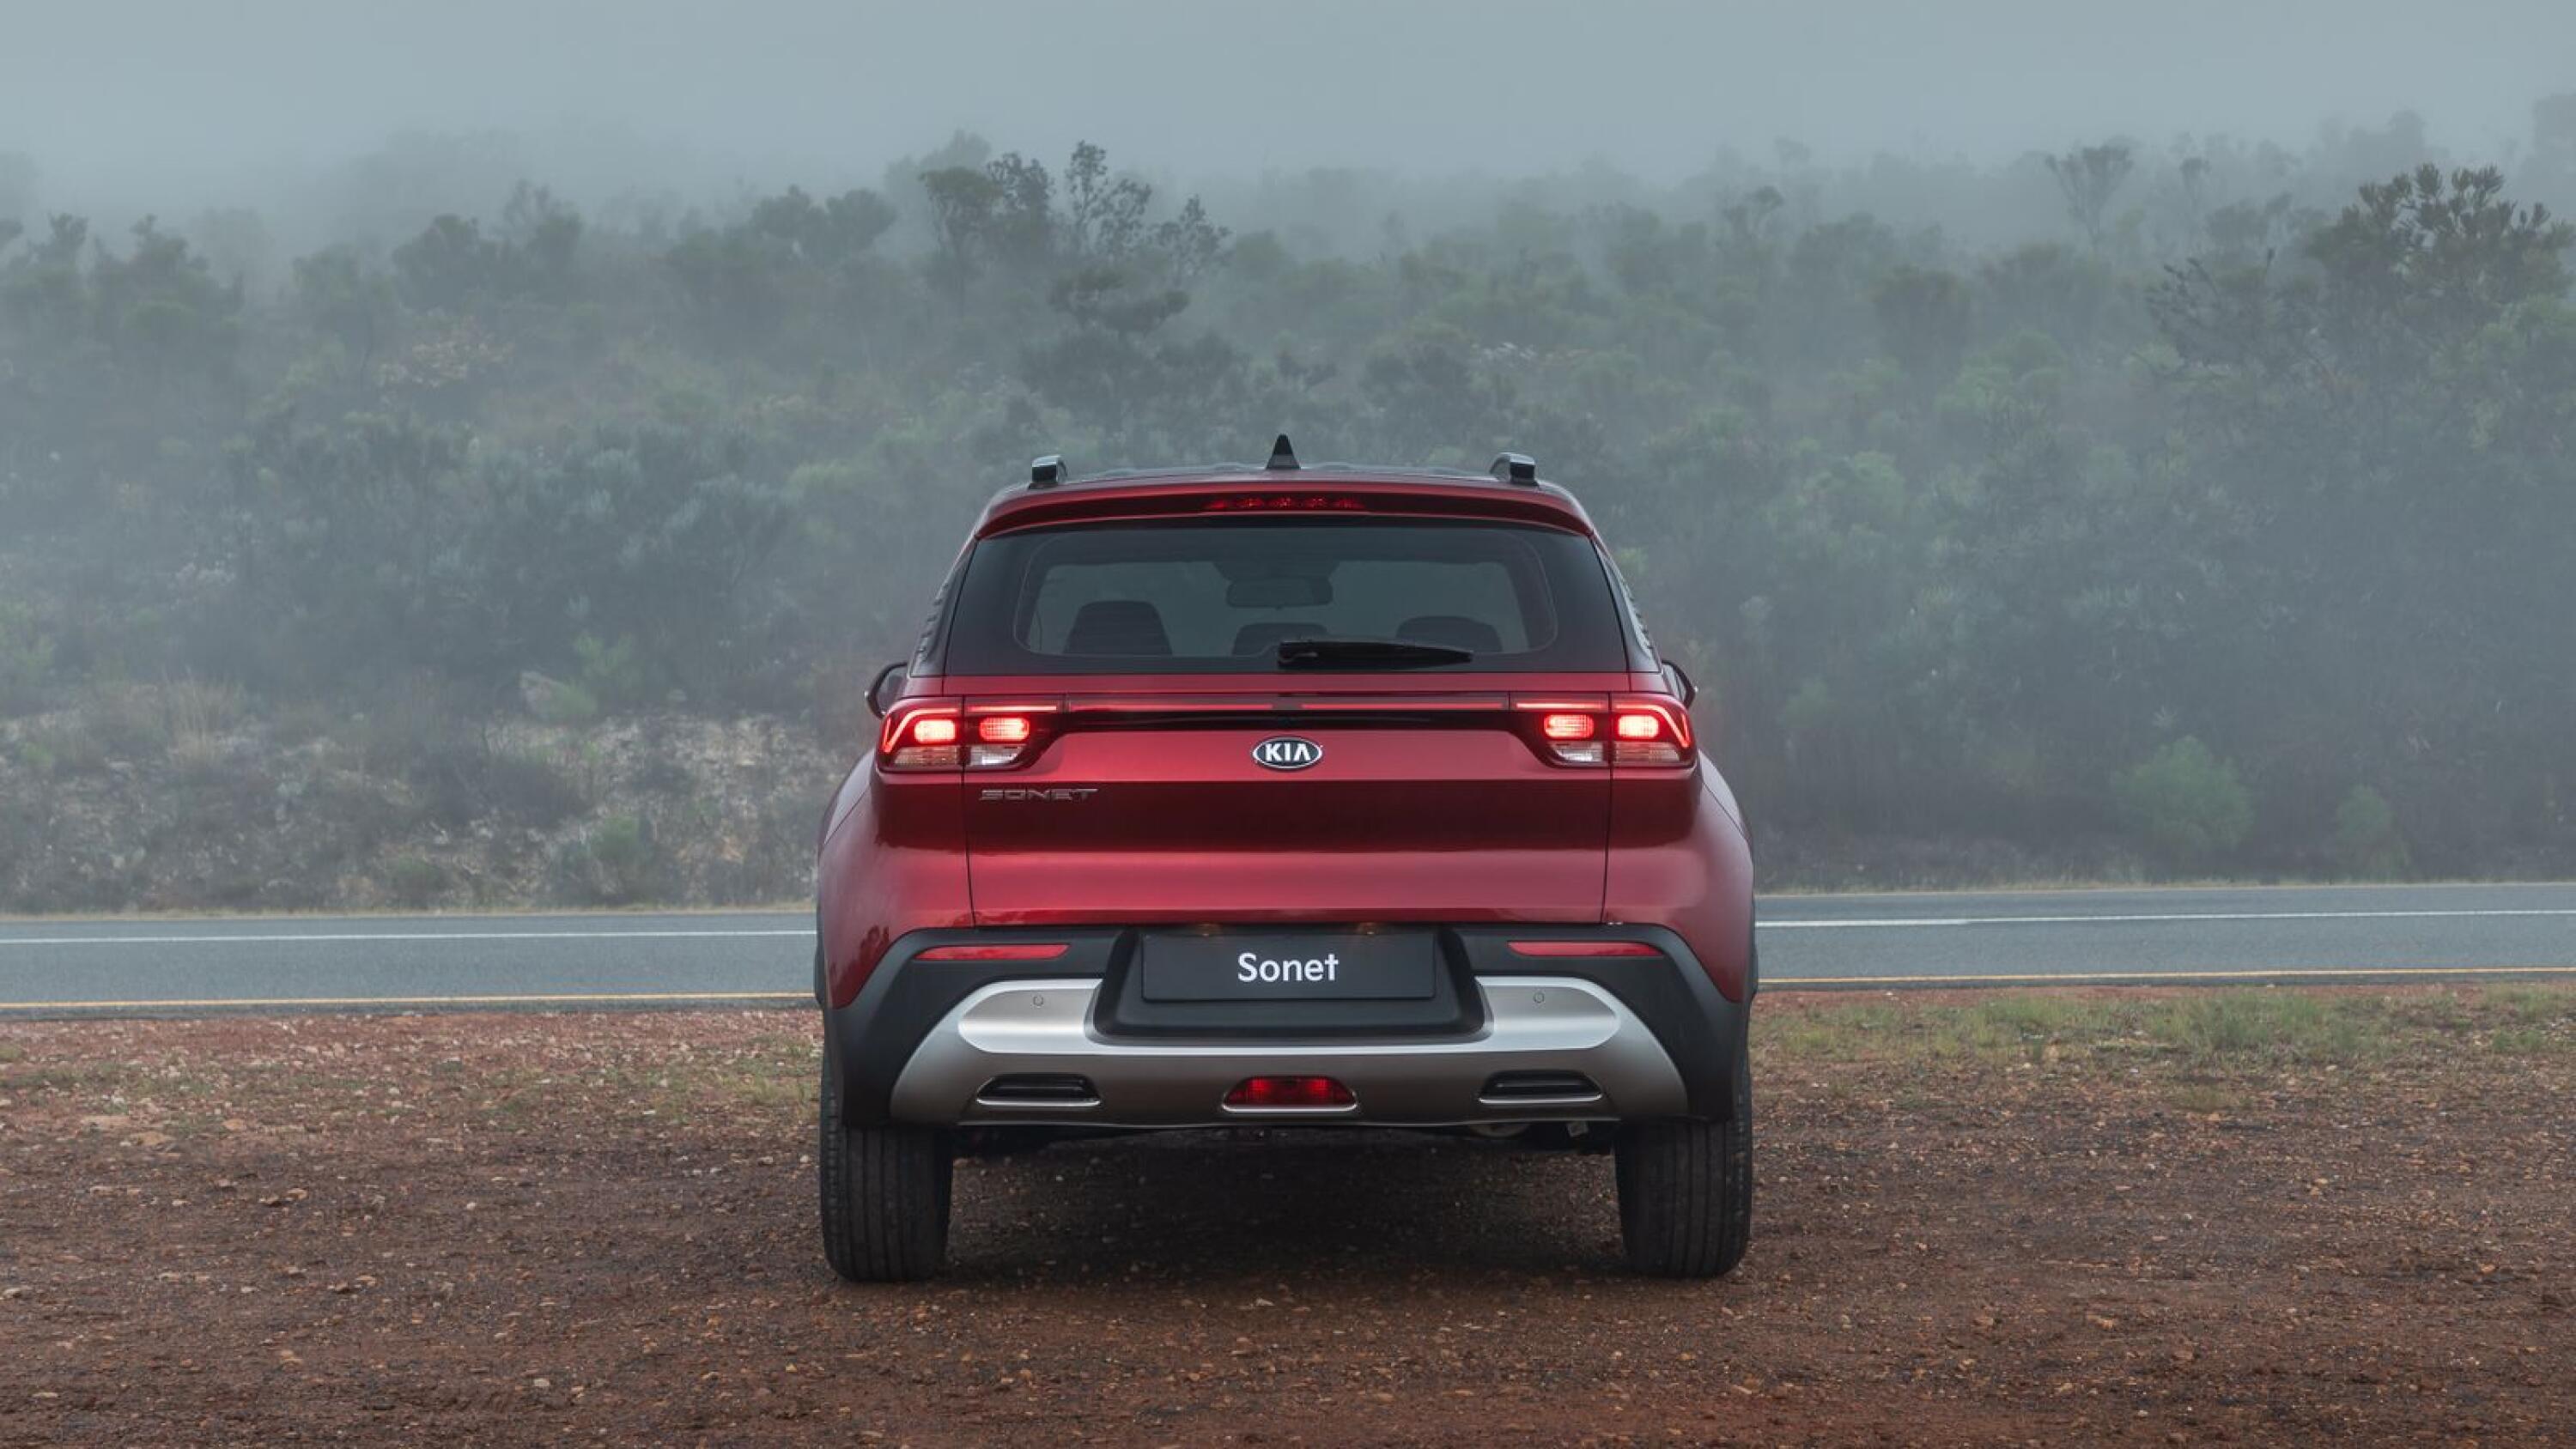 2021 KIA Sonet has just gone on sale in South Africa